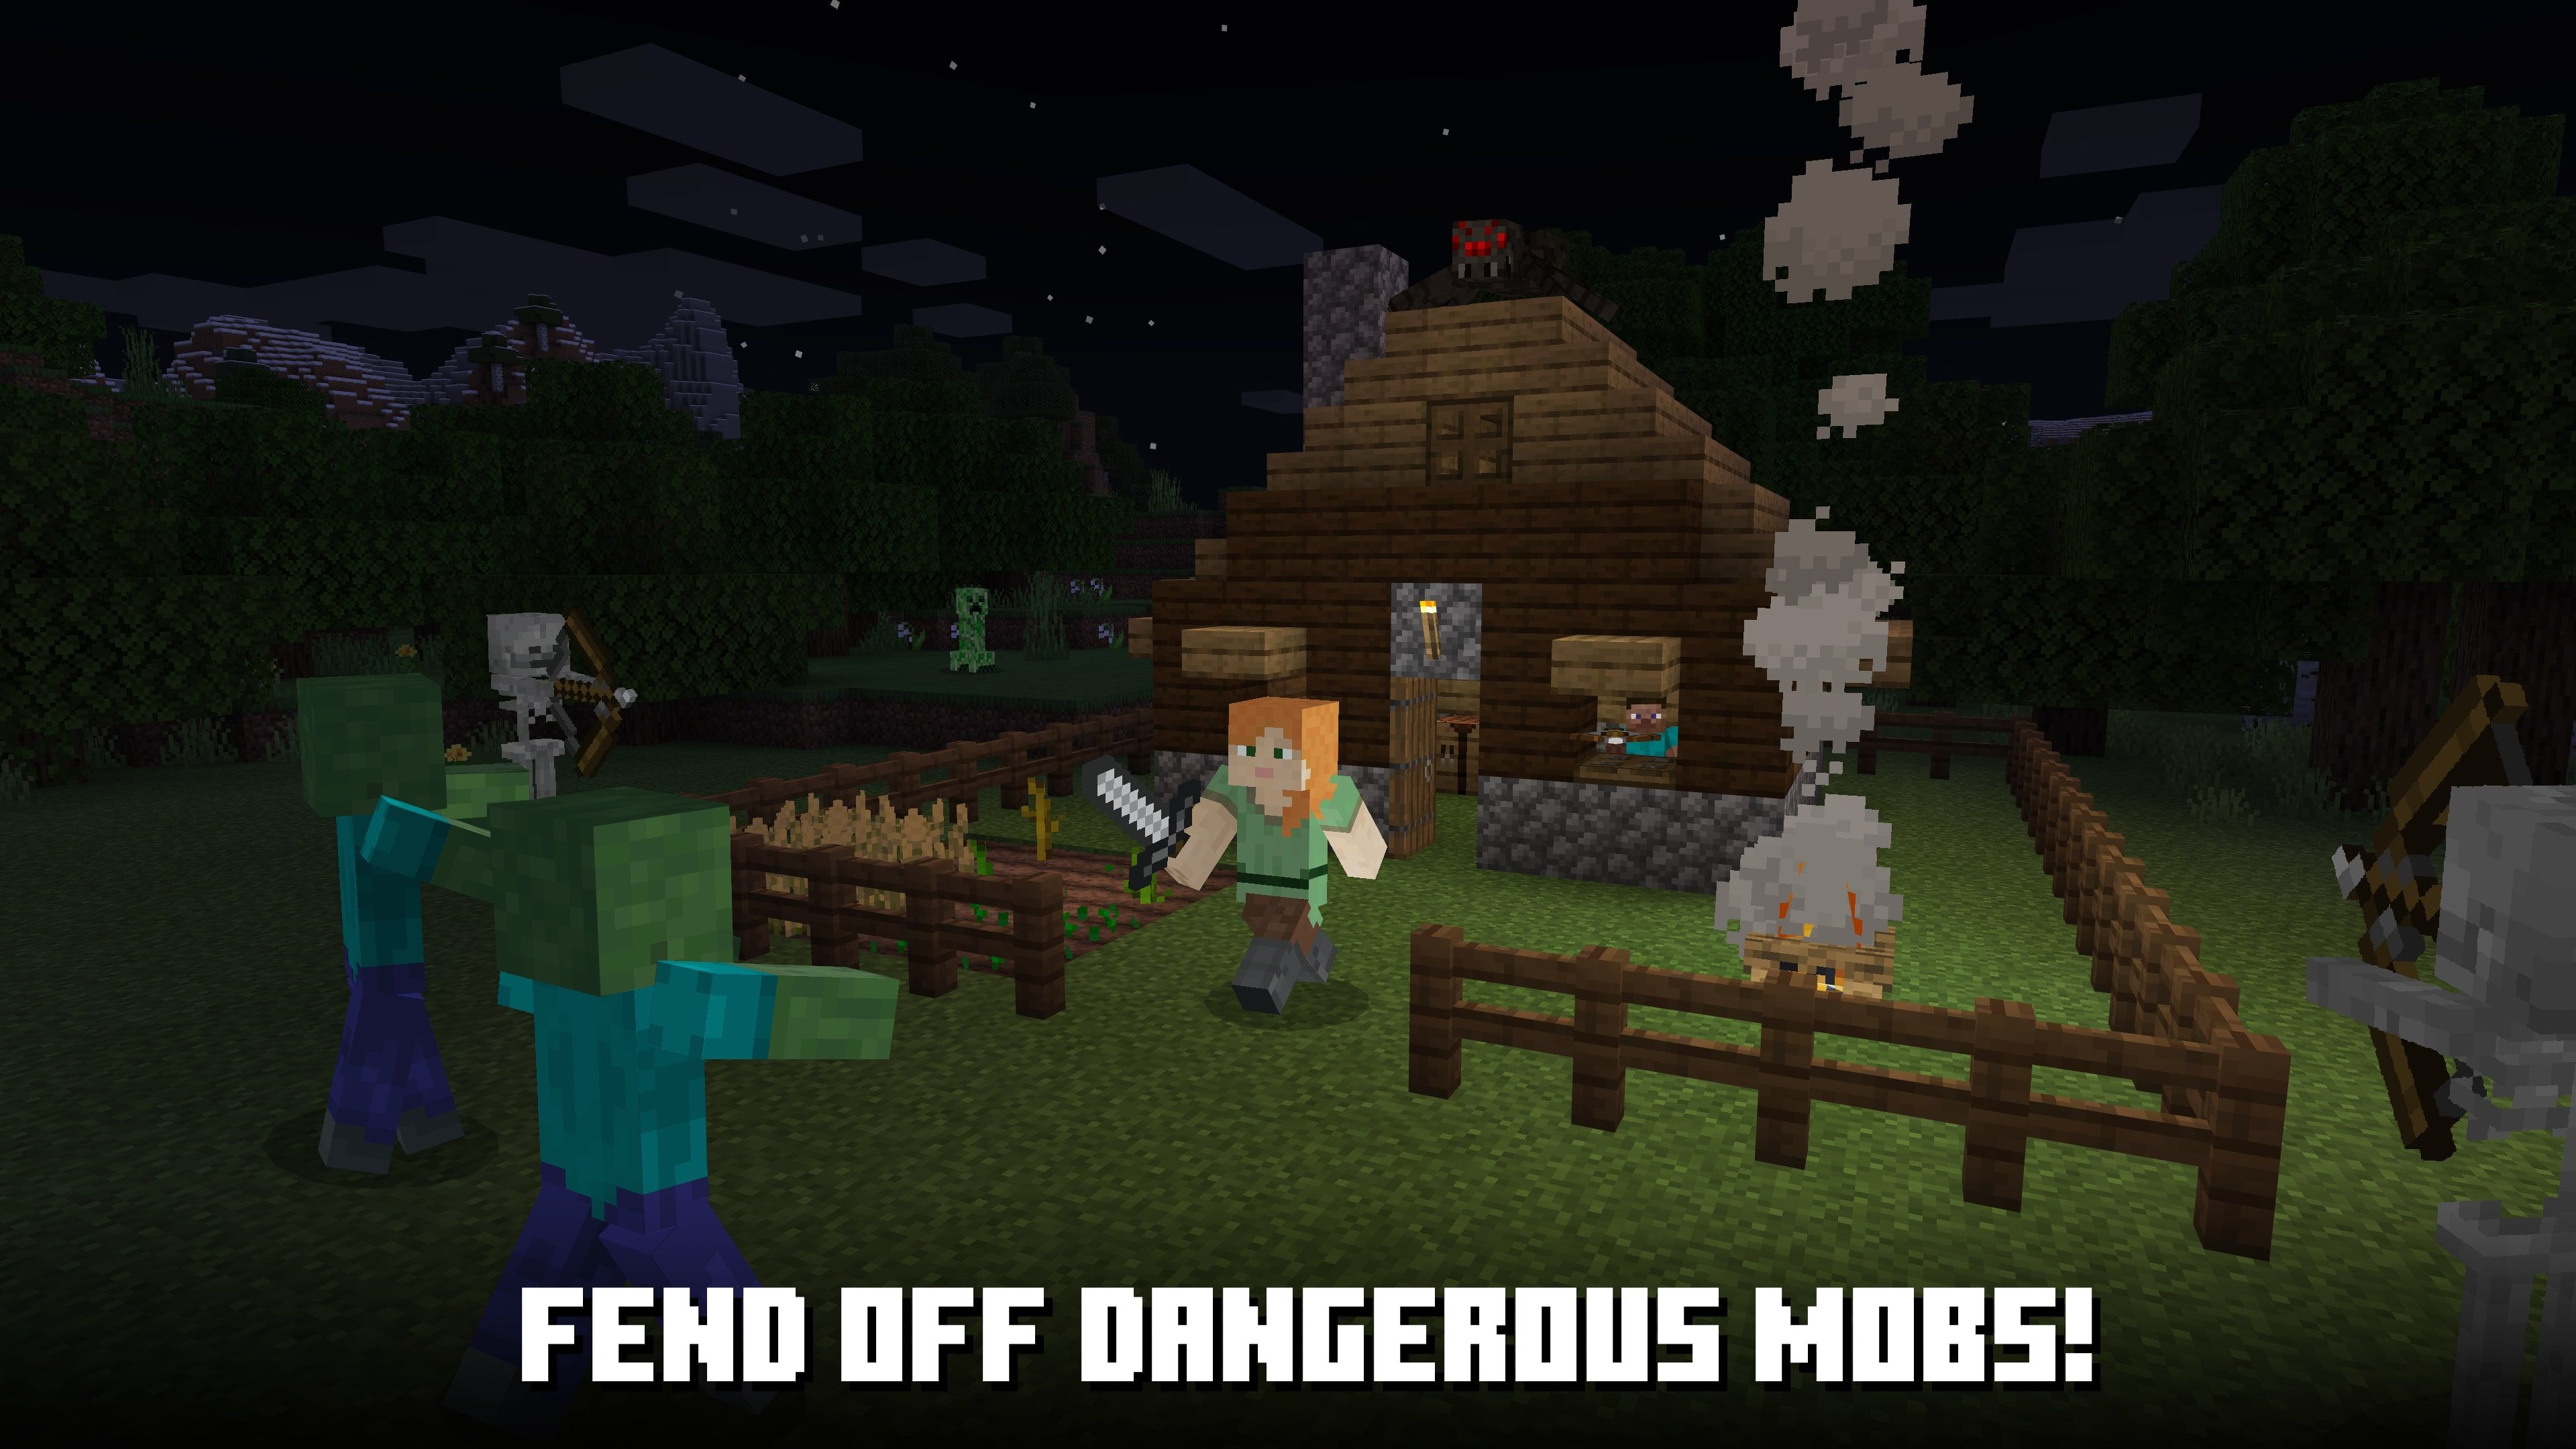 Minecraft character fending off zombies next to a house